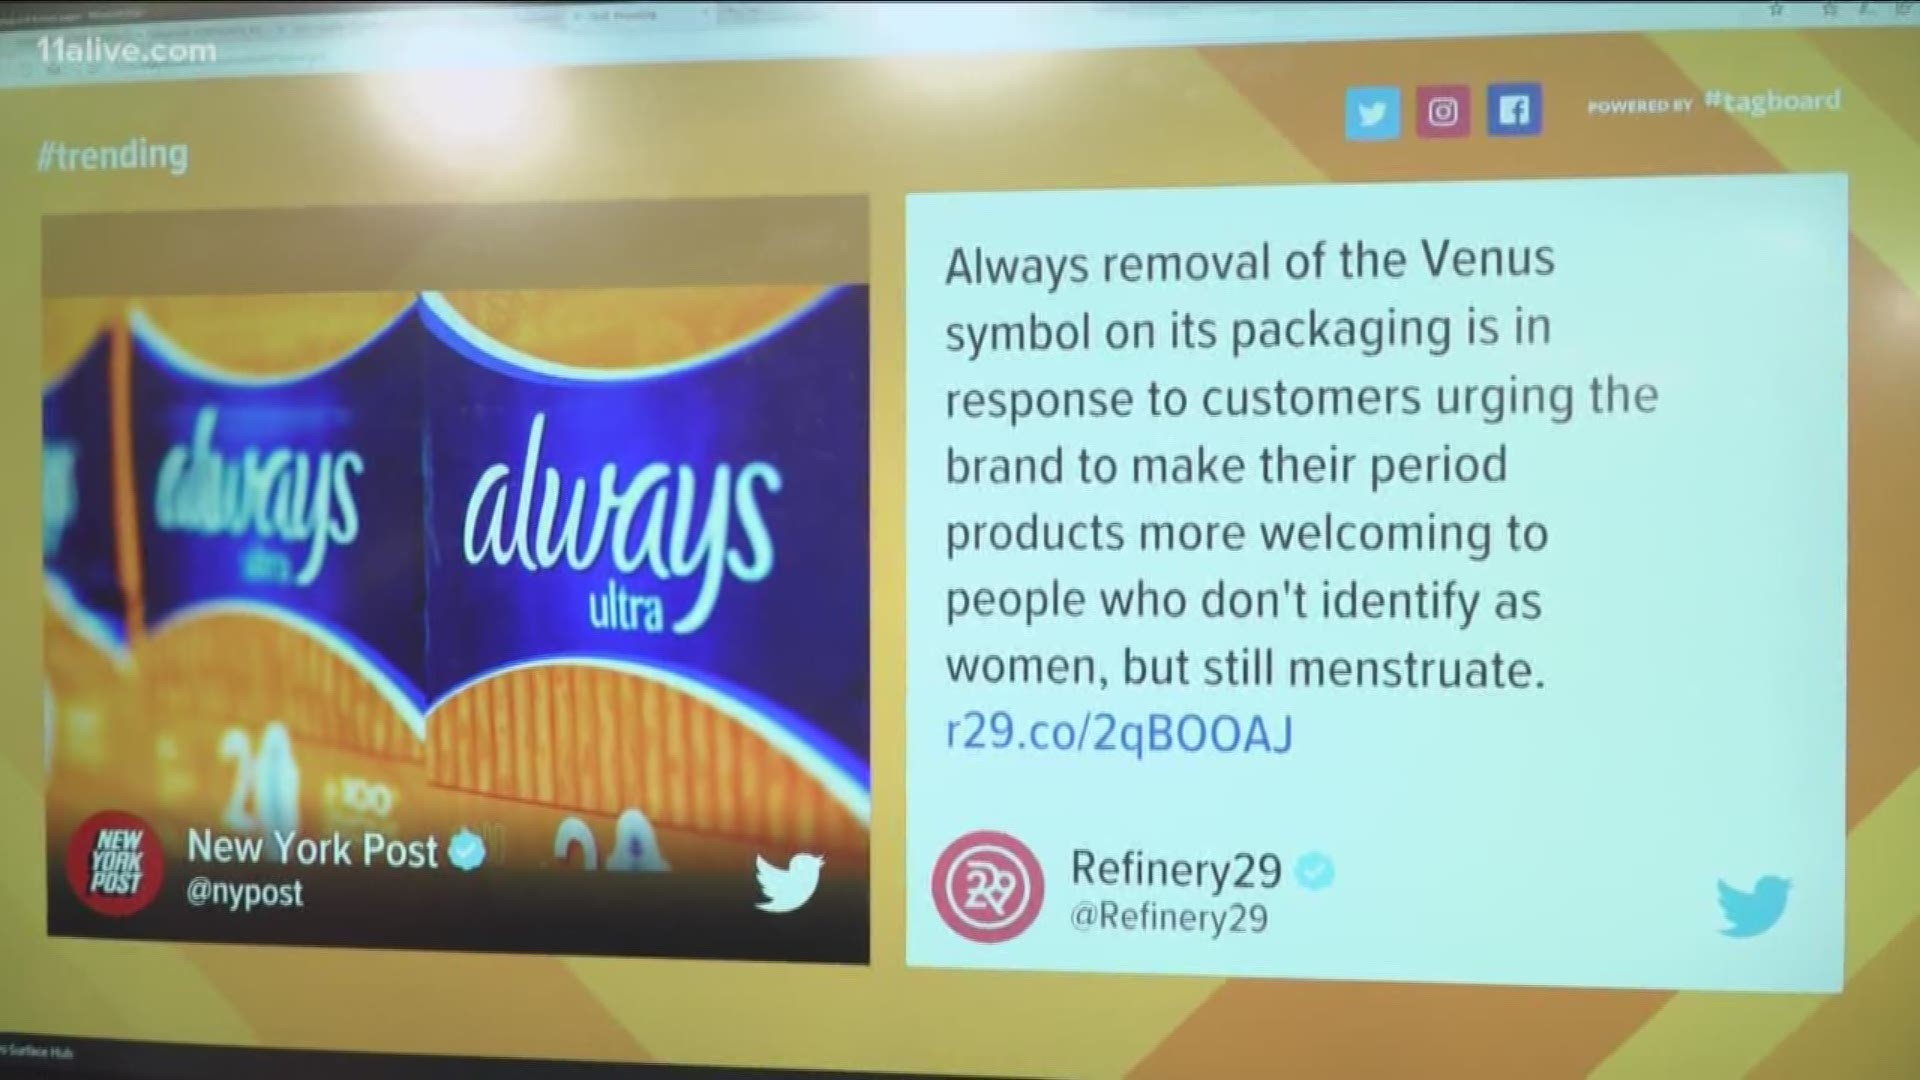 Procter & Gamble says that it wants to be more inclusive and will remove the Venus symbol from product packaging by December.